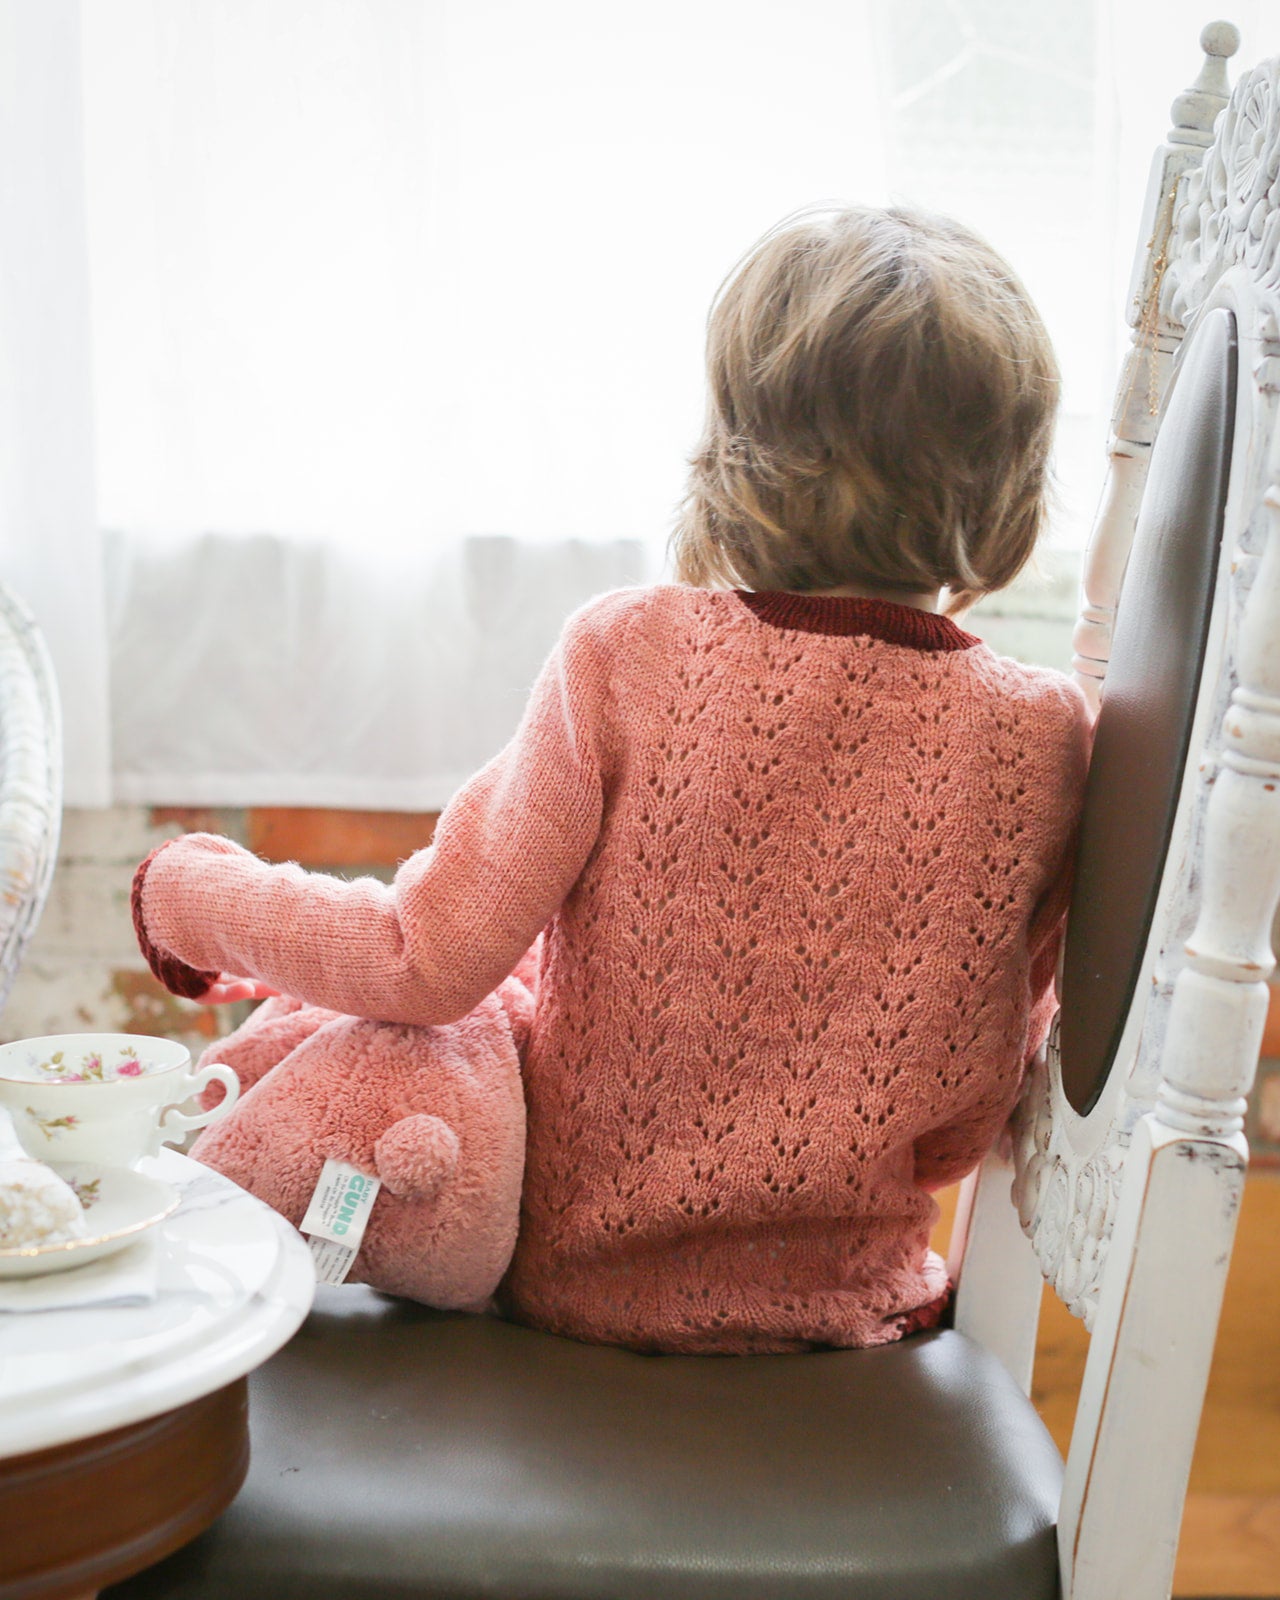 A young girl, seen from behind, sits on a white antique chair. She wears a light pink sweater, knit with a lace body and a dark pink collar, cuffs and hem. Teacups and a pink stuffed animal can be seen to her side.